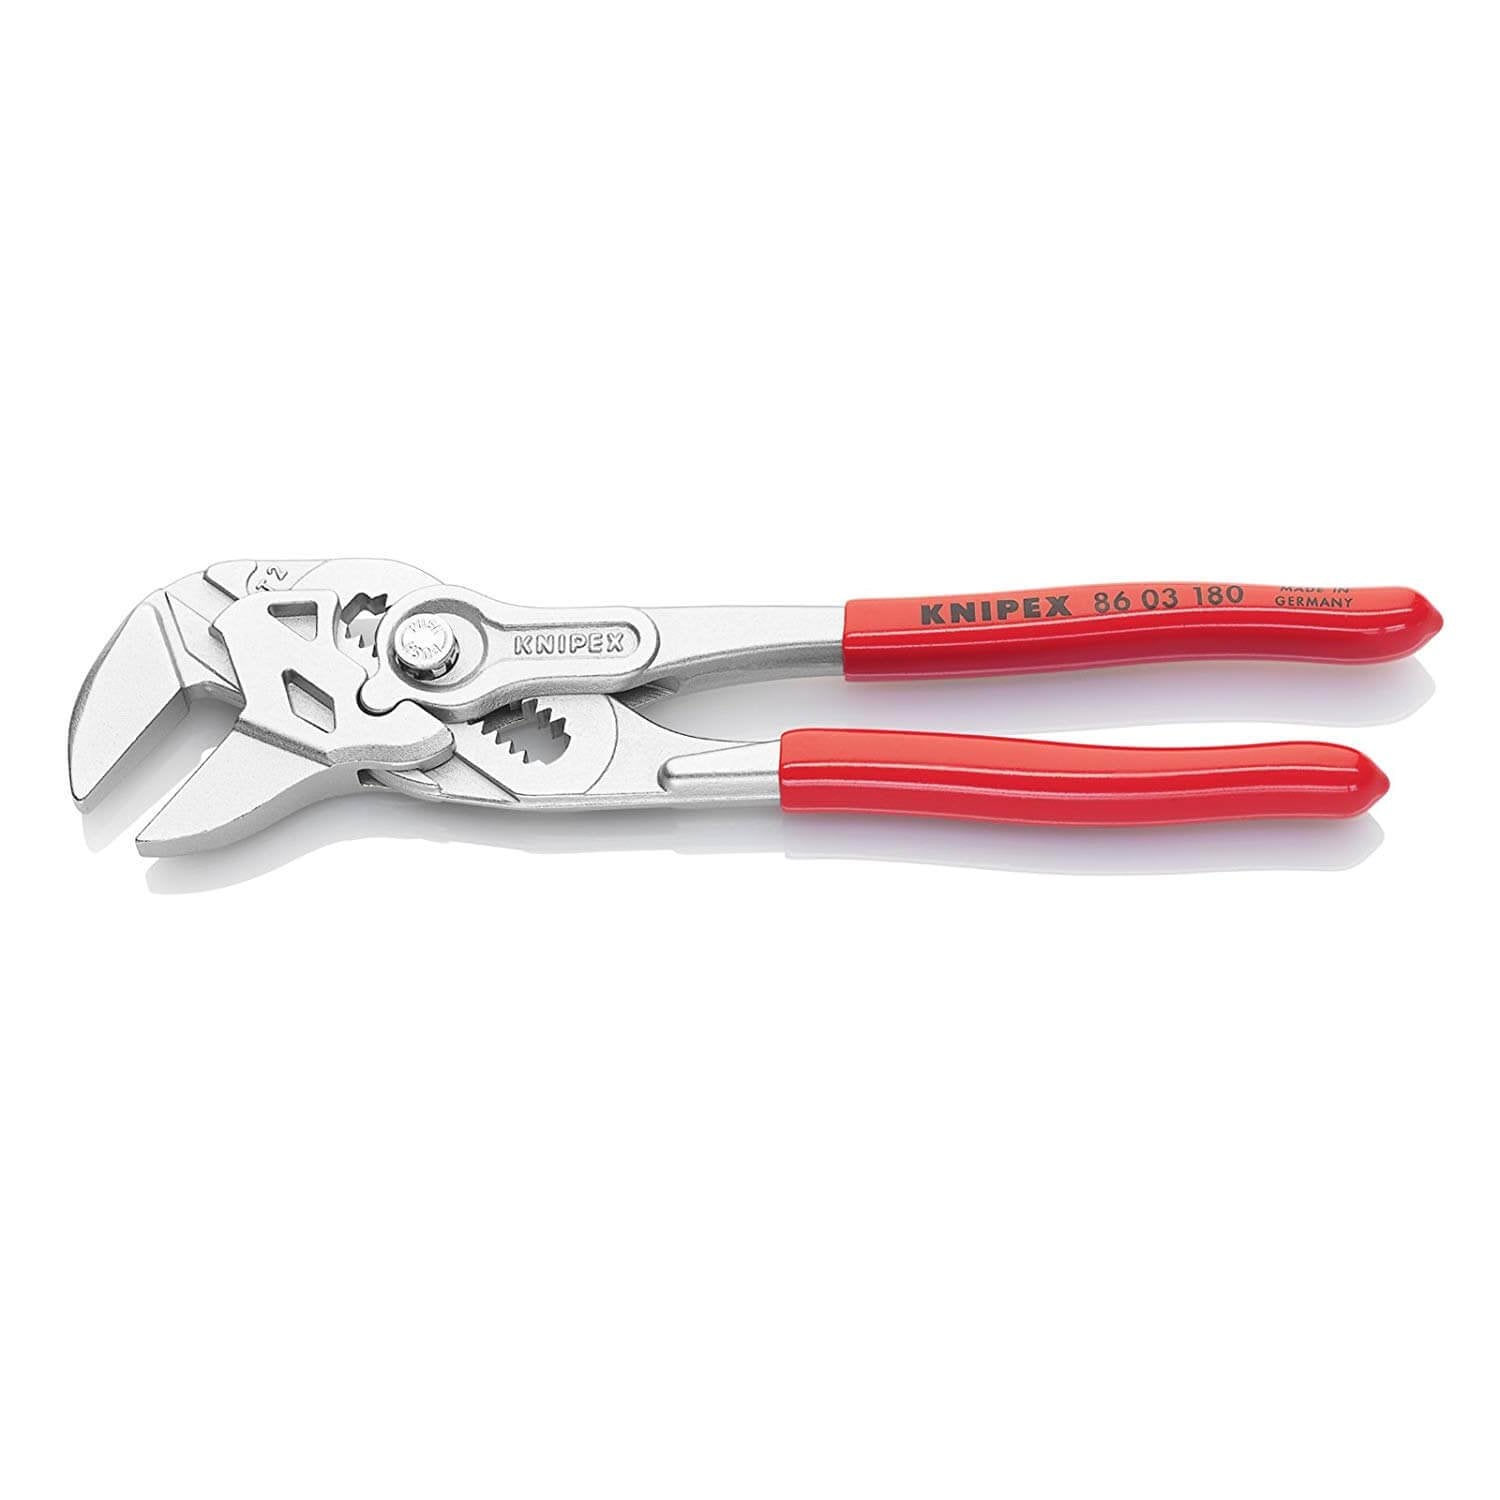 Knipex 8603180 - 7-1/4" Pliers Wrench